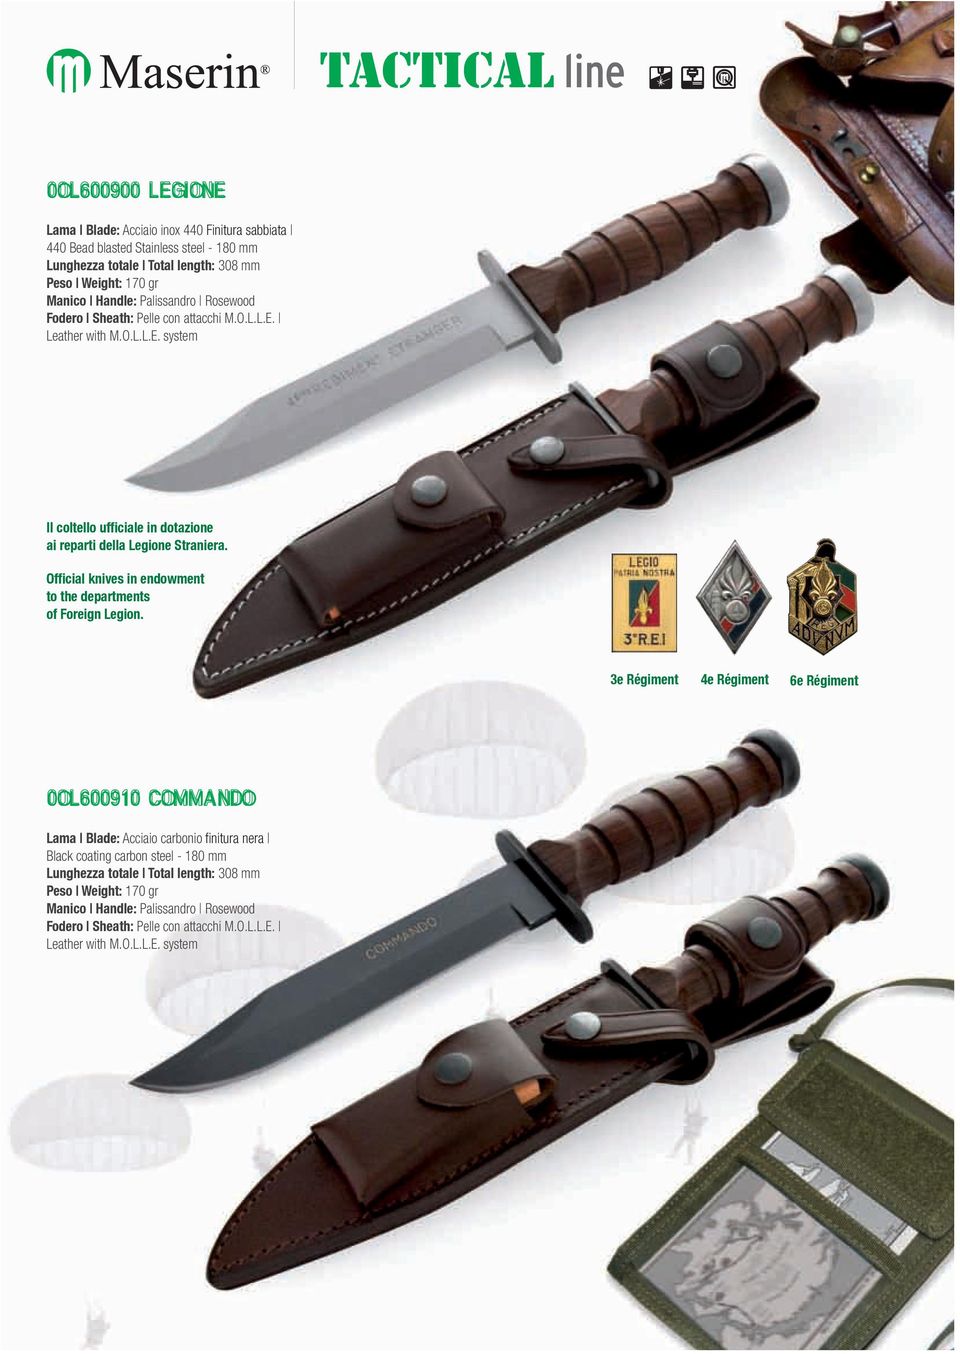 Official knives in endowment to the departments of Foreign Legion.